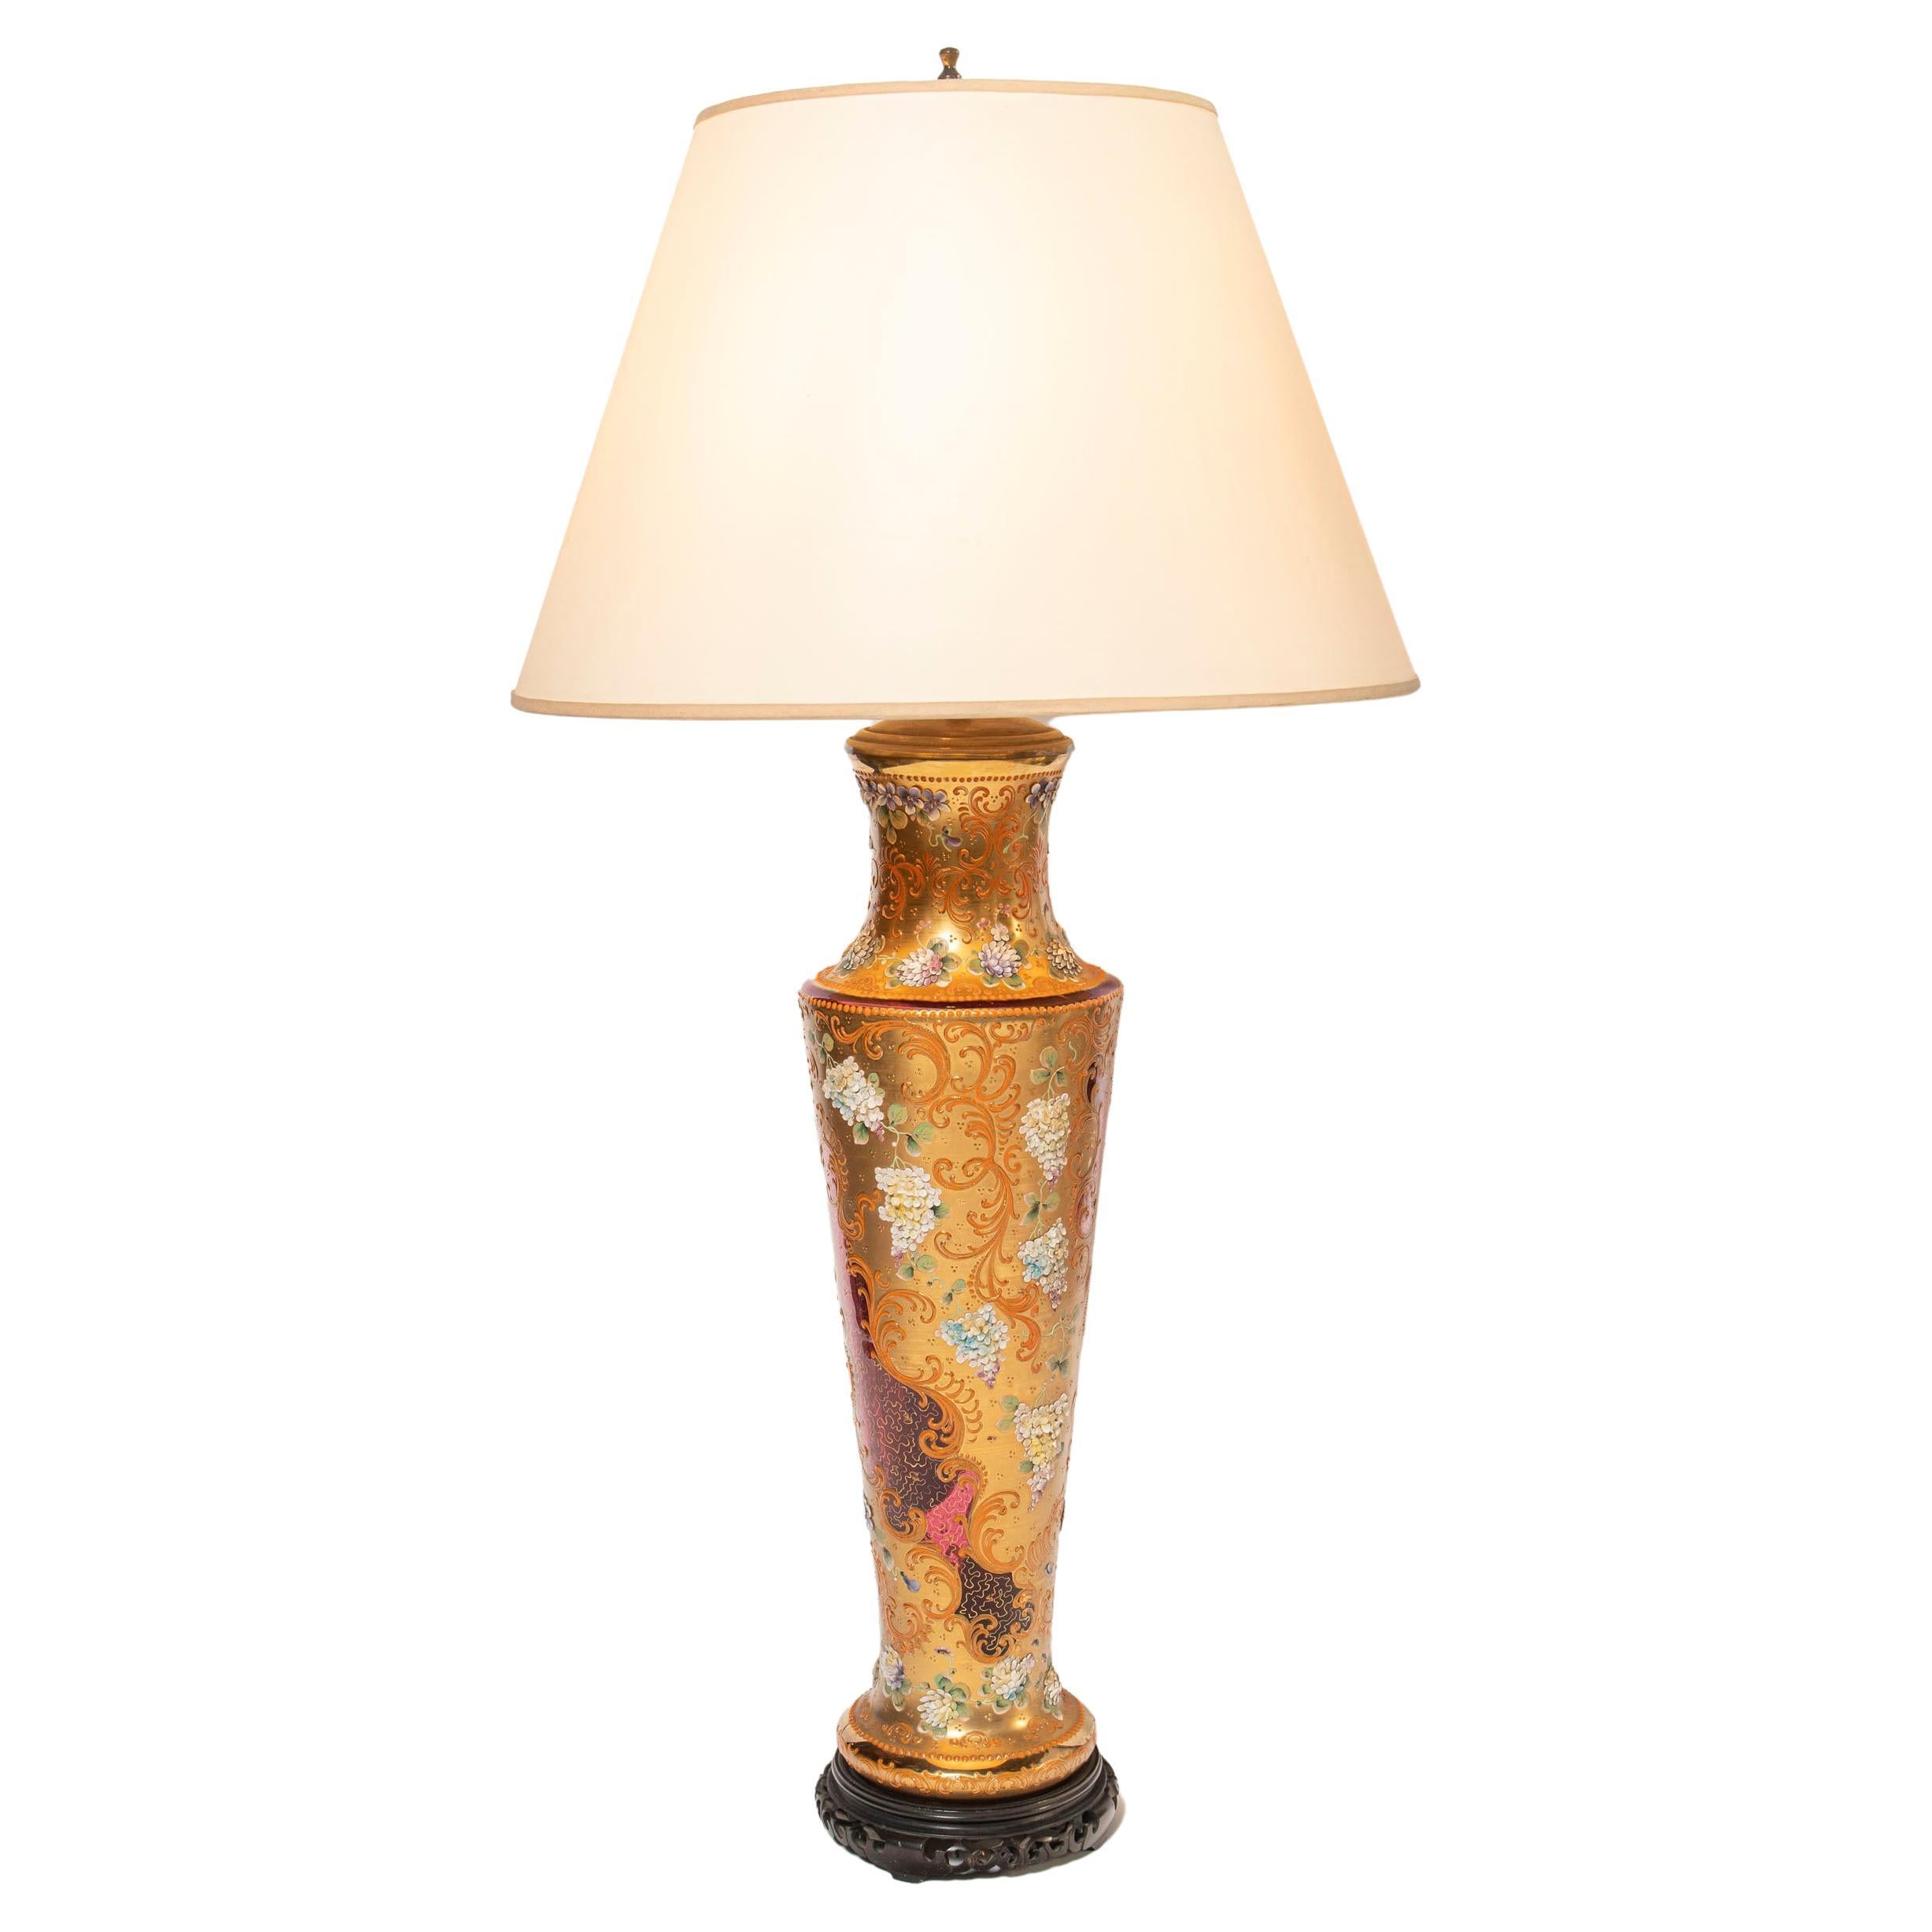 Murano glass, gold and enamel table lamp, Italy, early 20th century.